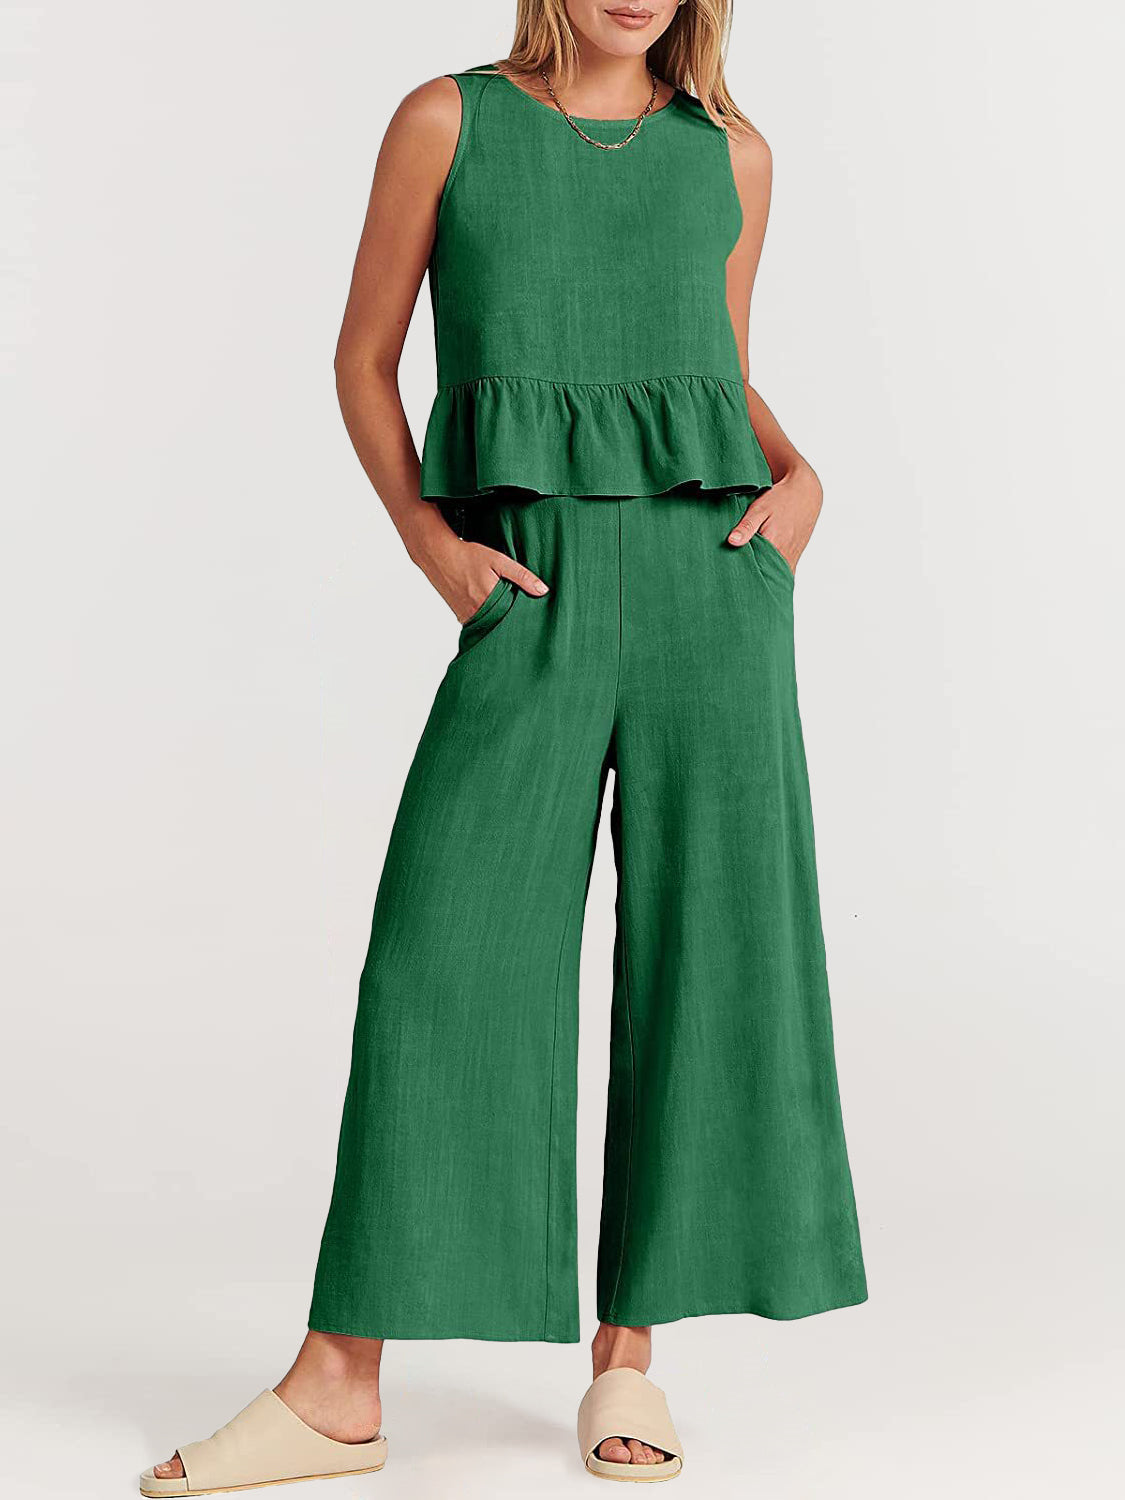 NTG Fad Two Pieces Sets Dark Green / S(4-6) Two Piece Outfits Sleeveless Top and Wide Leg Pants Lounge Set